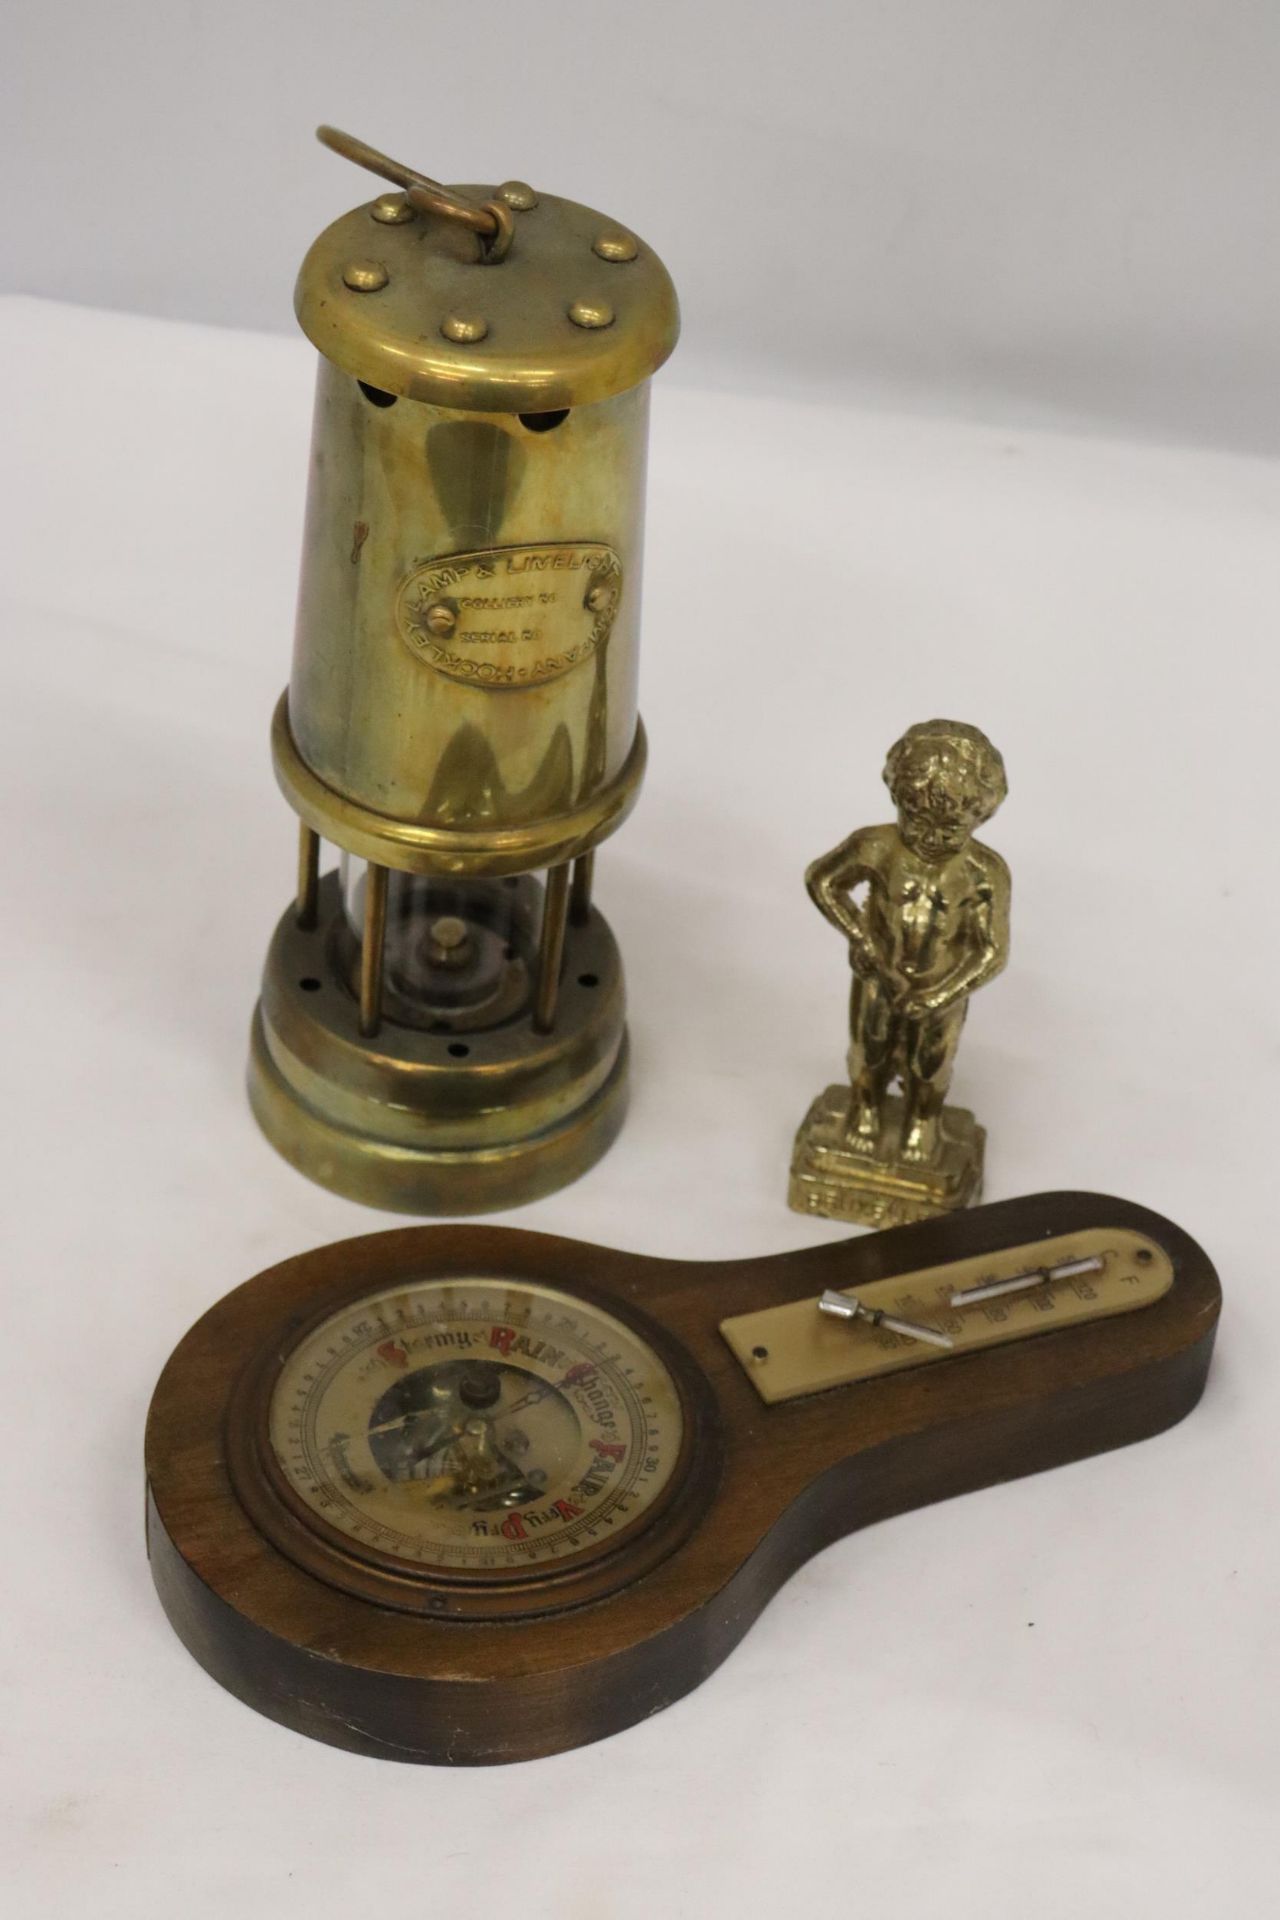 A BRASS MINER'S LAMP TOGETHER WITH A BAROMETER AND BRASS FIGURE